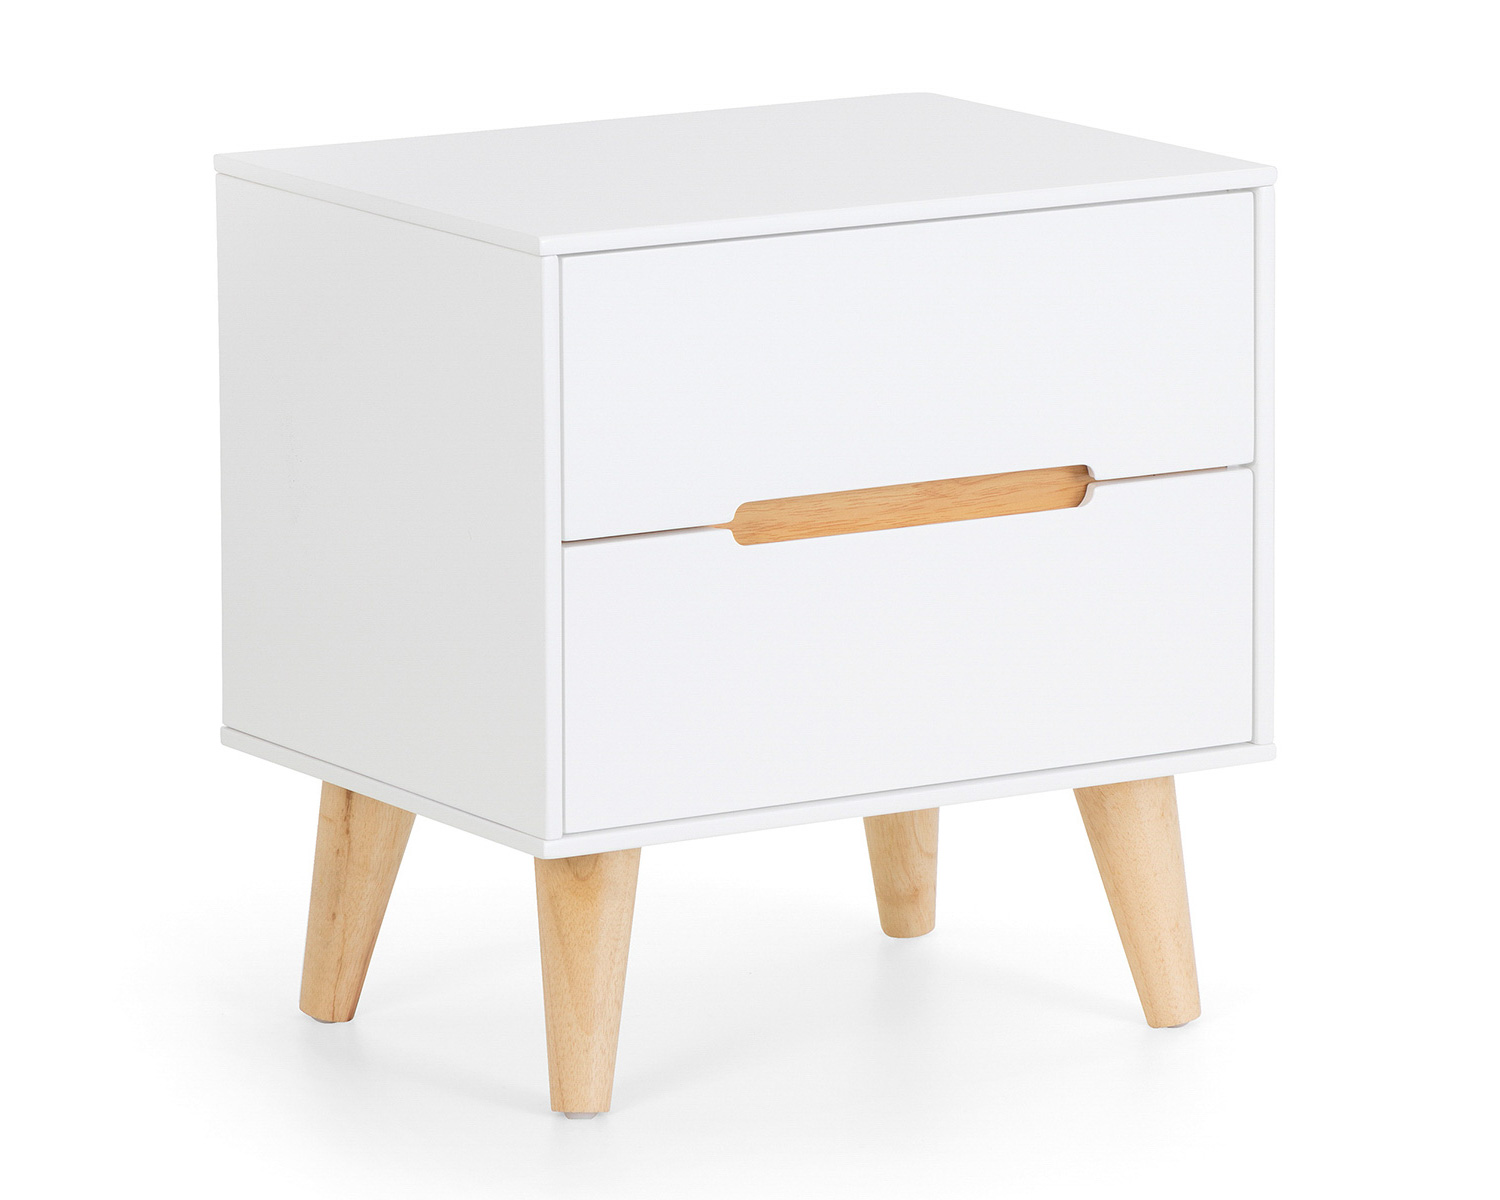 Image of Alicia White & Oak Bedside Table with 2 Drawers